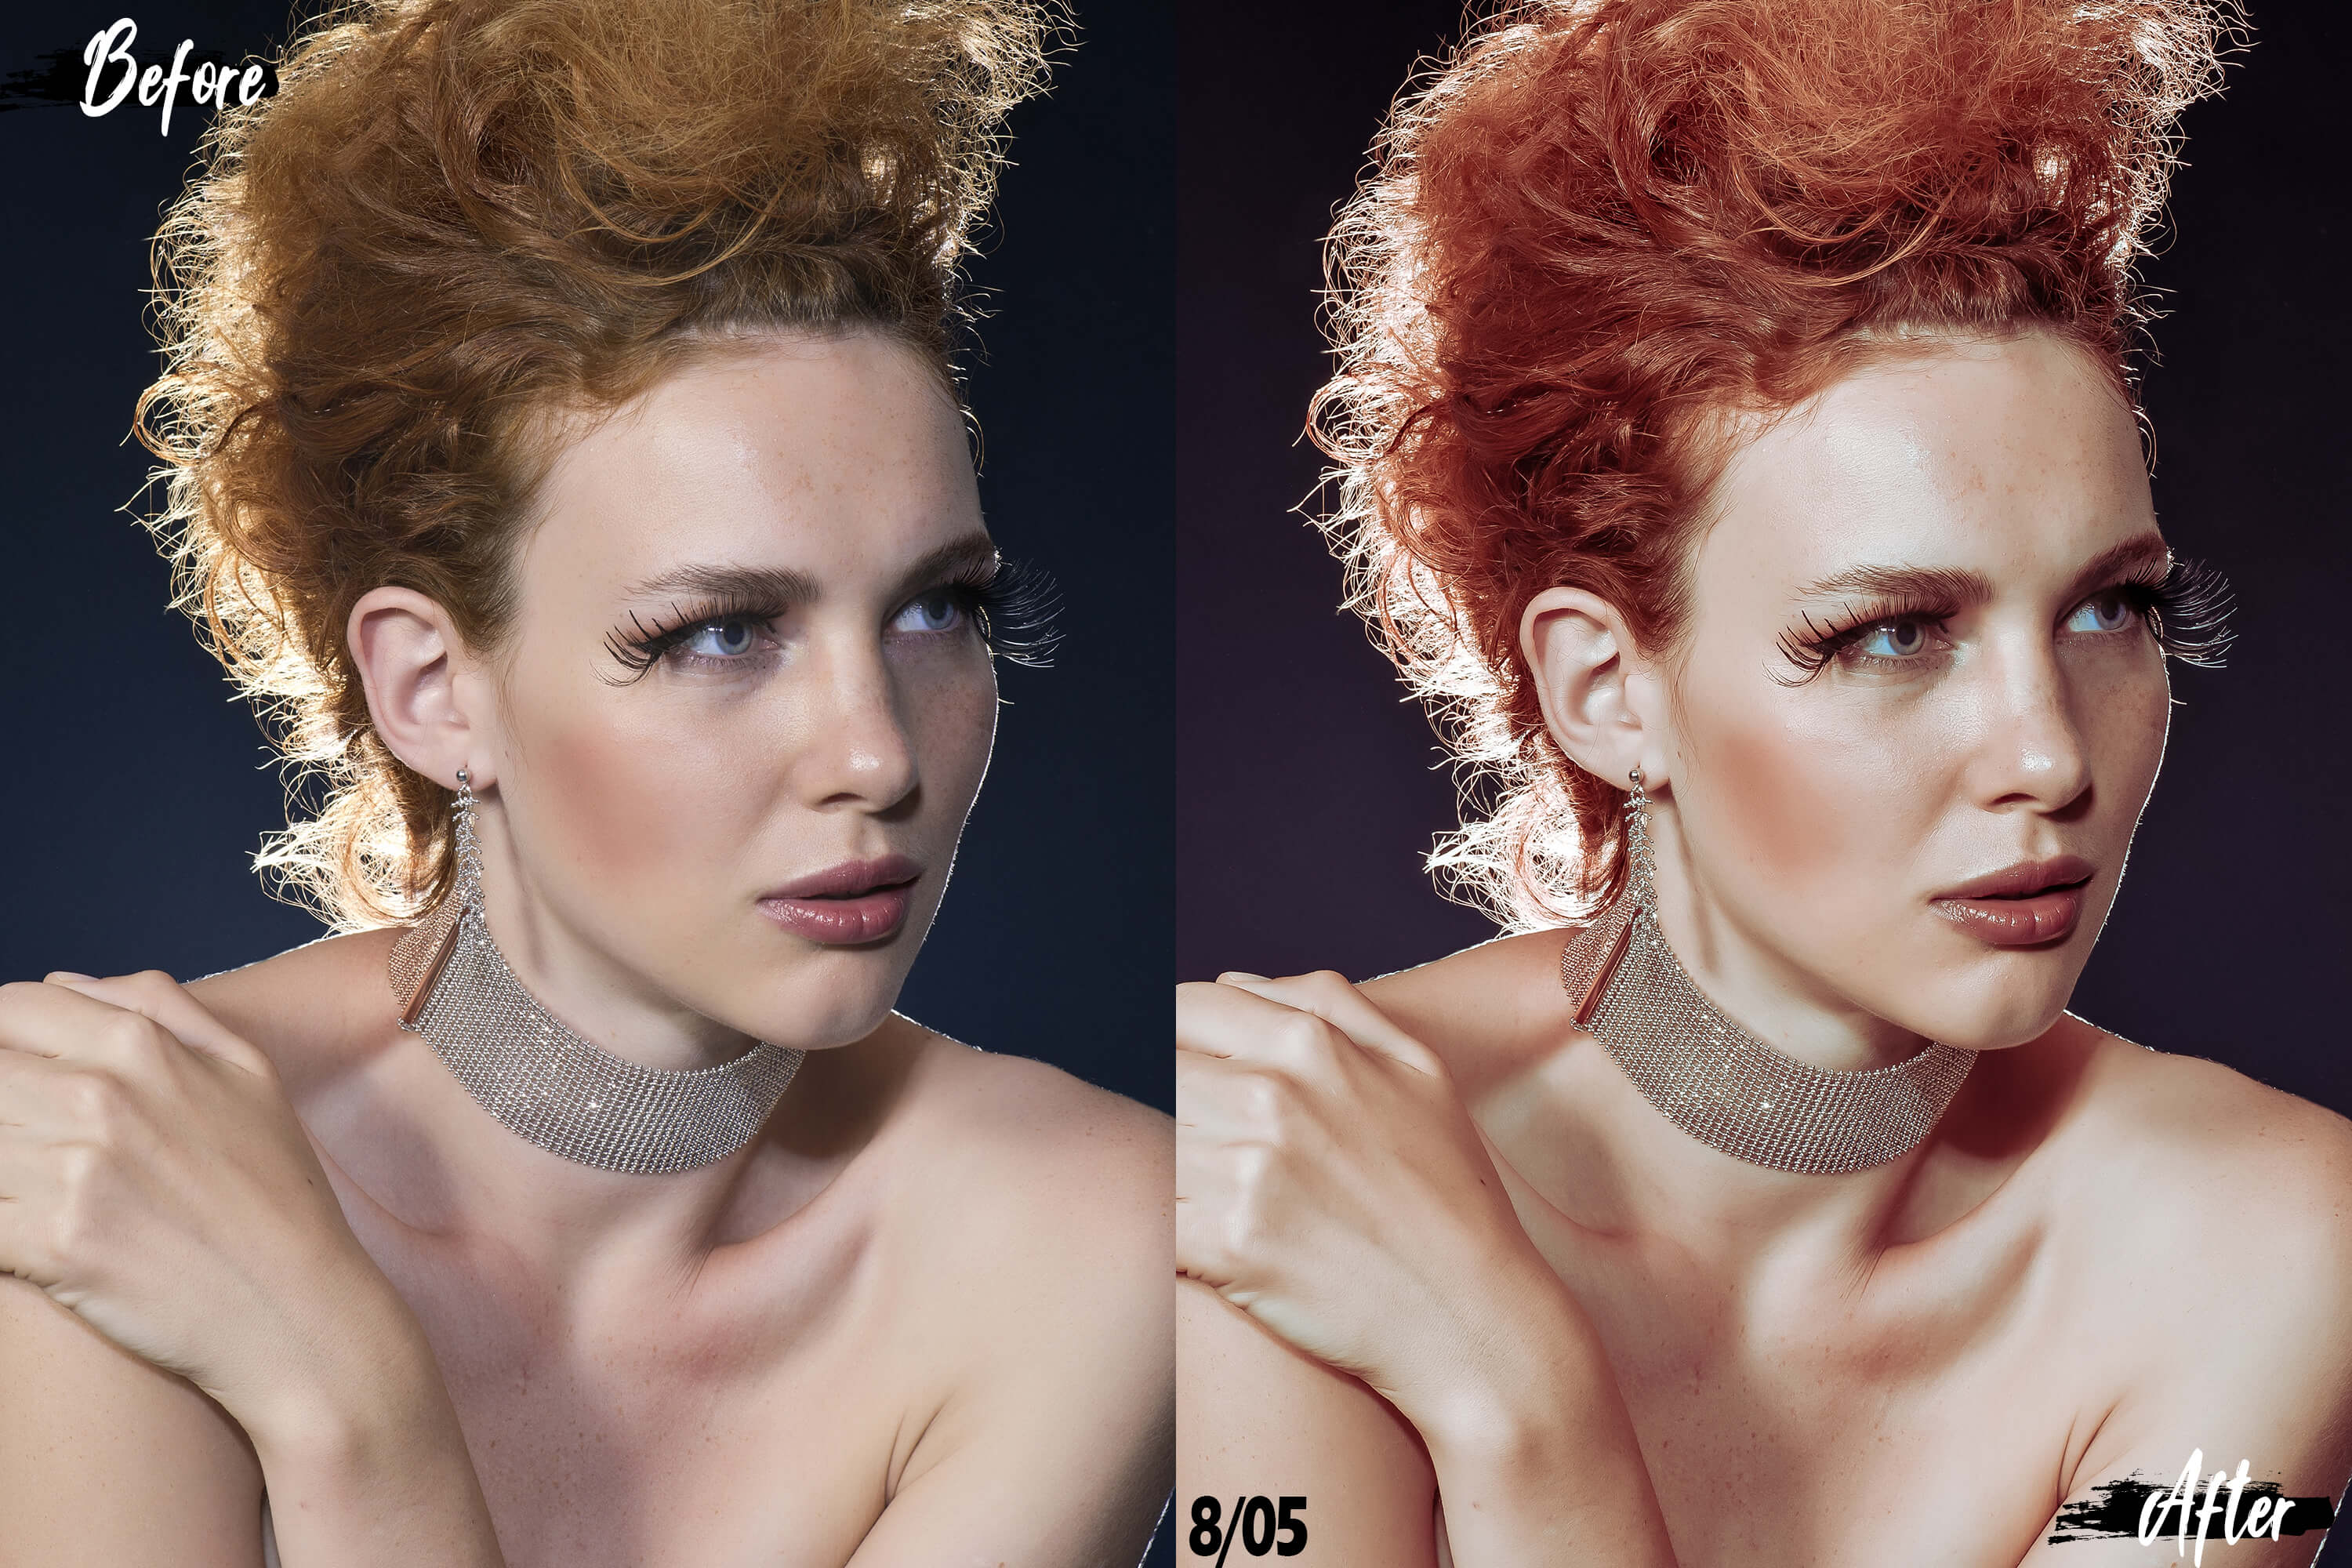 7. "Blonde Hair Photoshop Manipulation for Male Characters" - wide 6